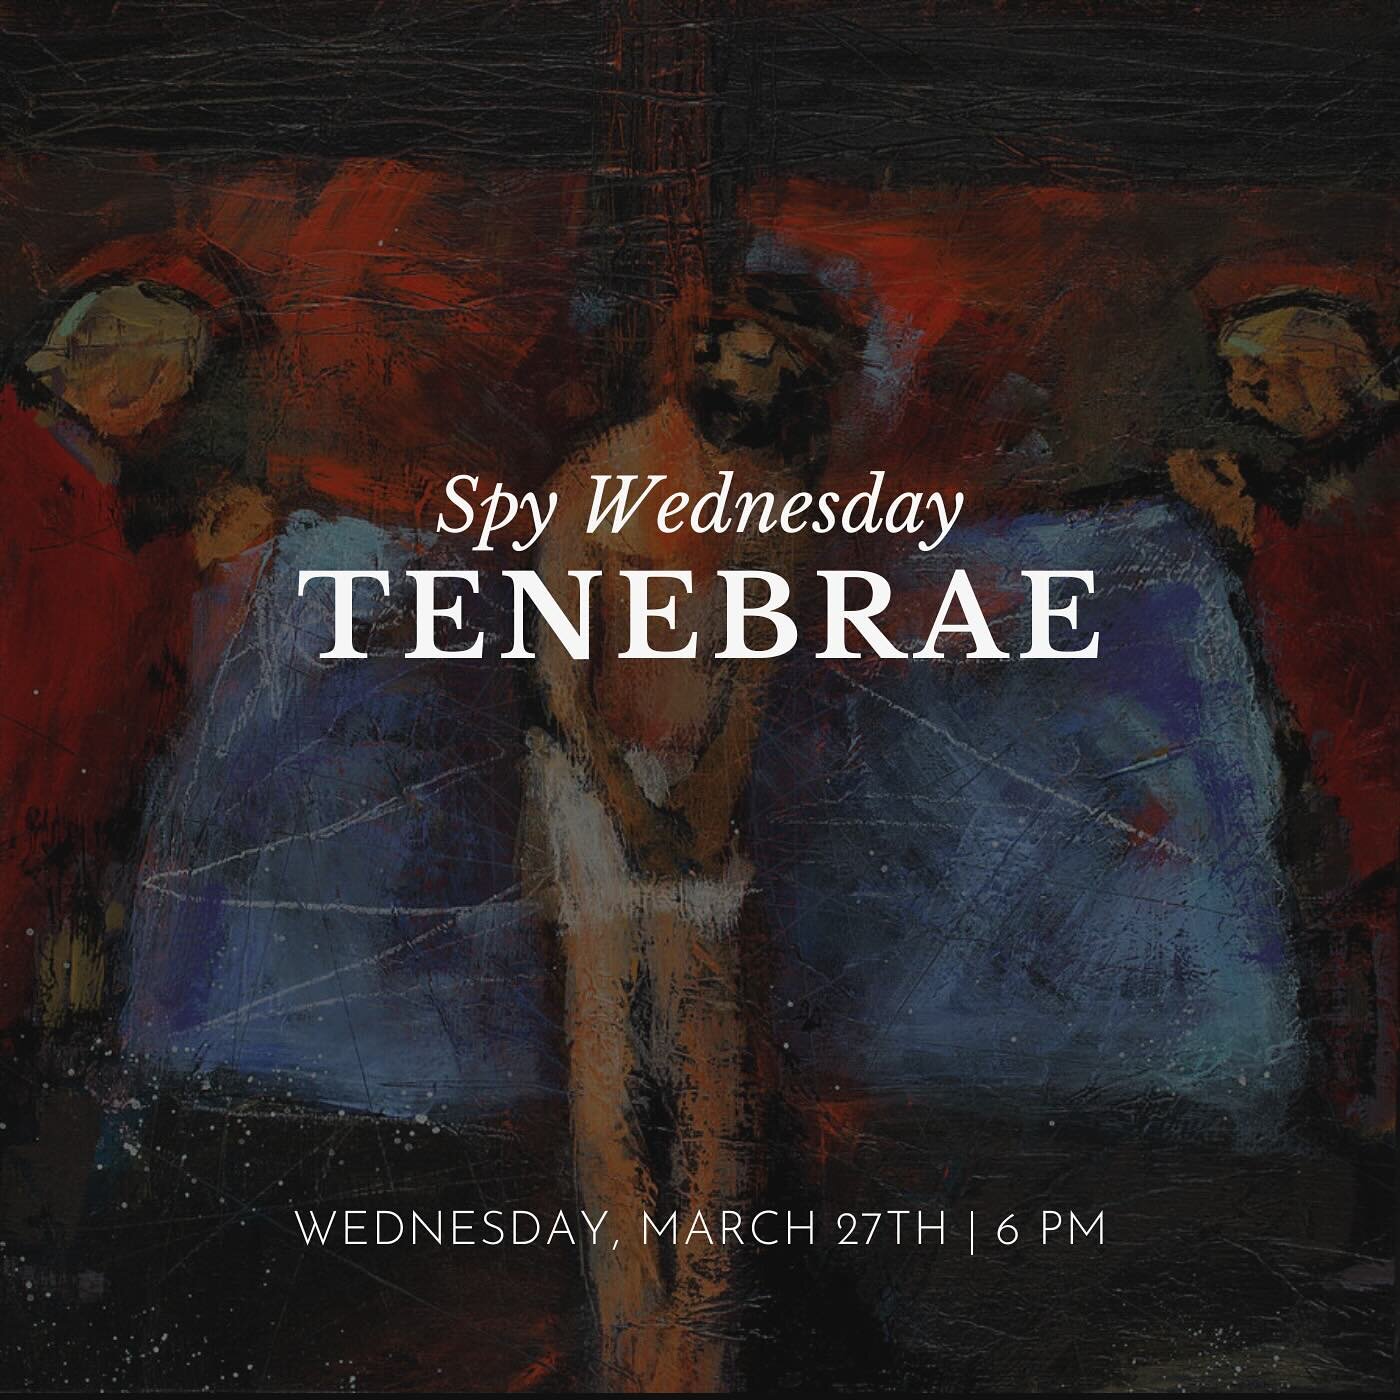 Join us on Wednesday, March 27th at 6 PM for our Tenebrae service. Tenebrae&nbsp;is the Latin word for &ldquo;darkness.&rdquo; This service is marked by the slow movement into darkness inviting us to contemplate our Lenten journey as it nears its sil